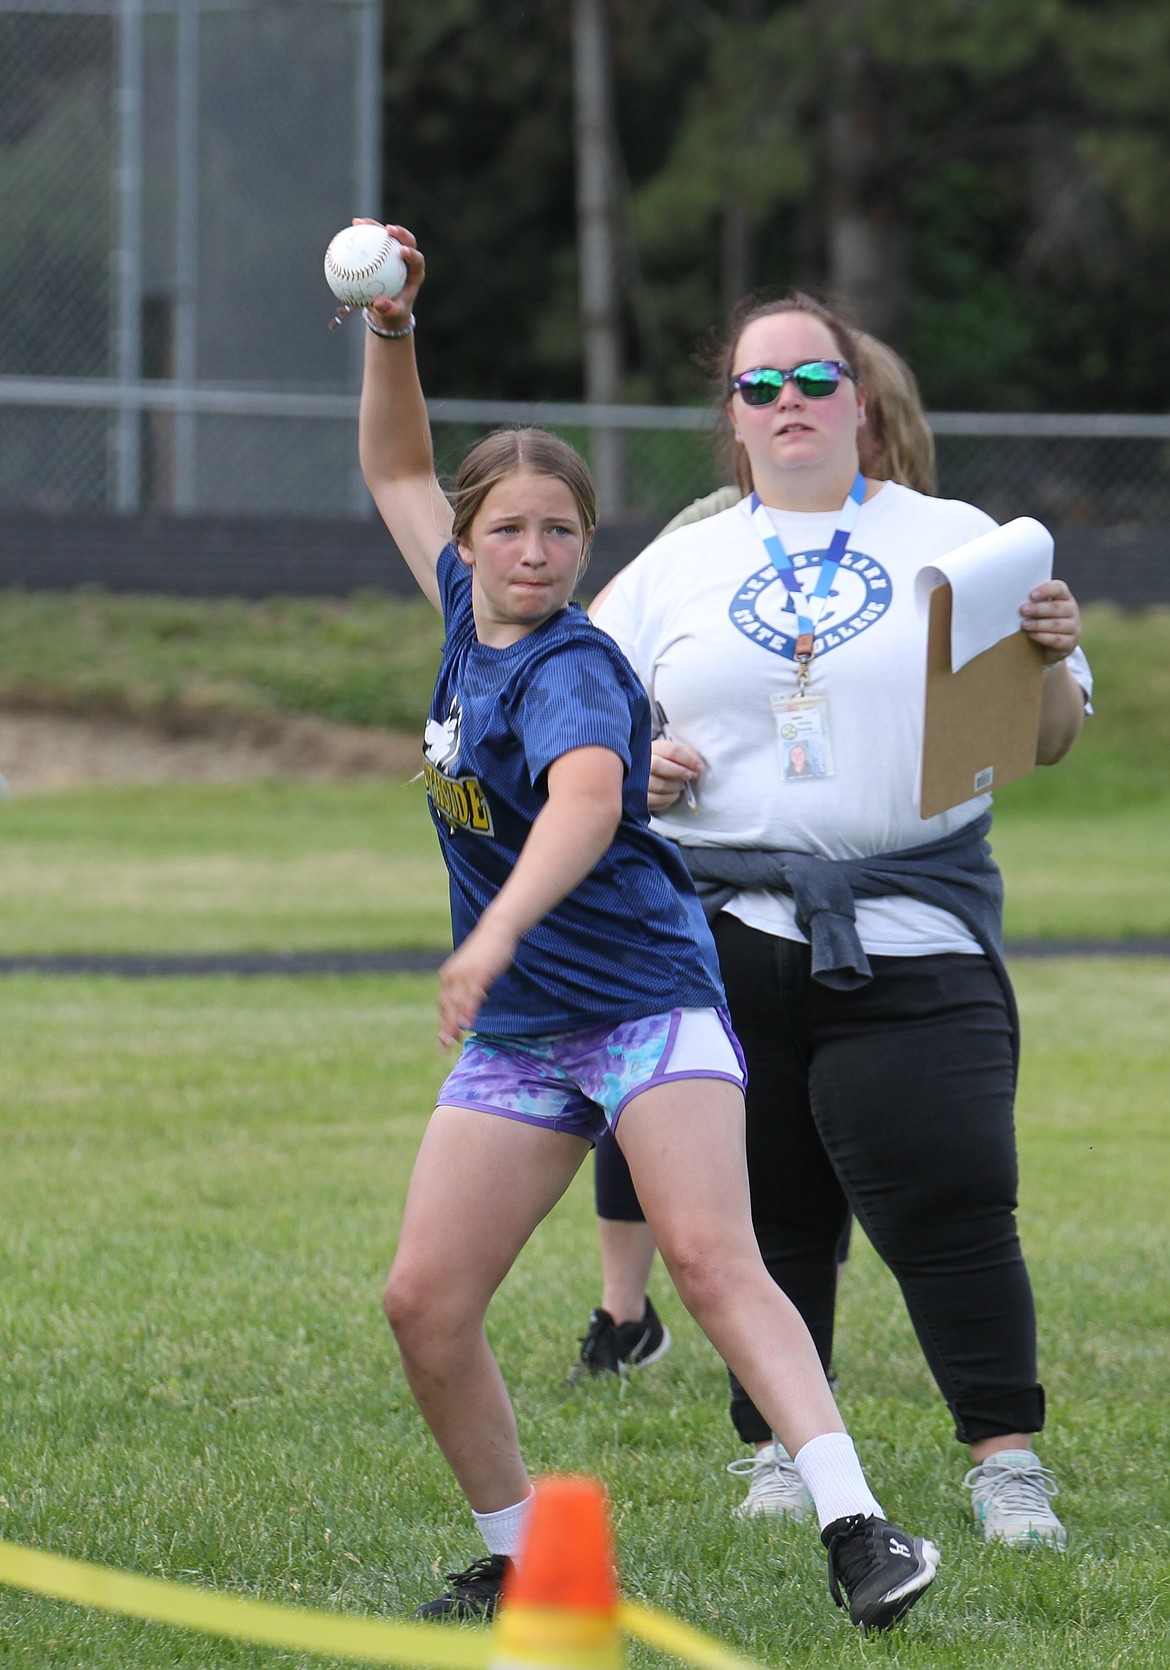 A Northside Elementary School student competes in the softball throw.